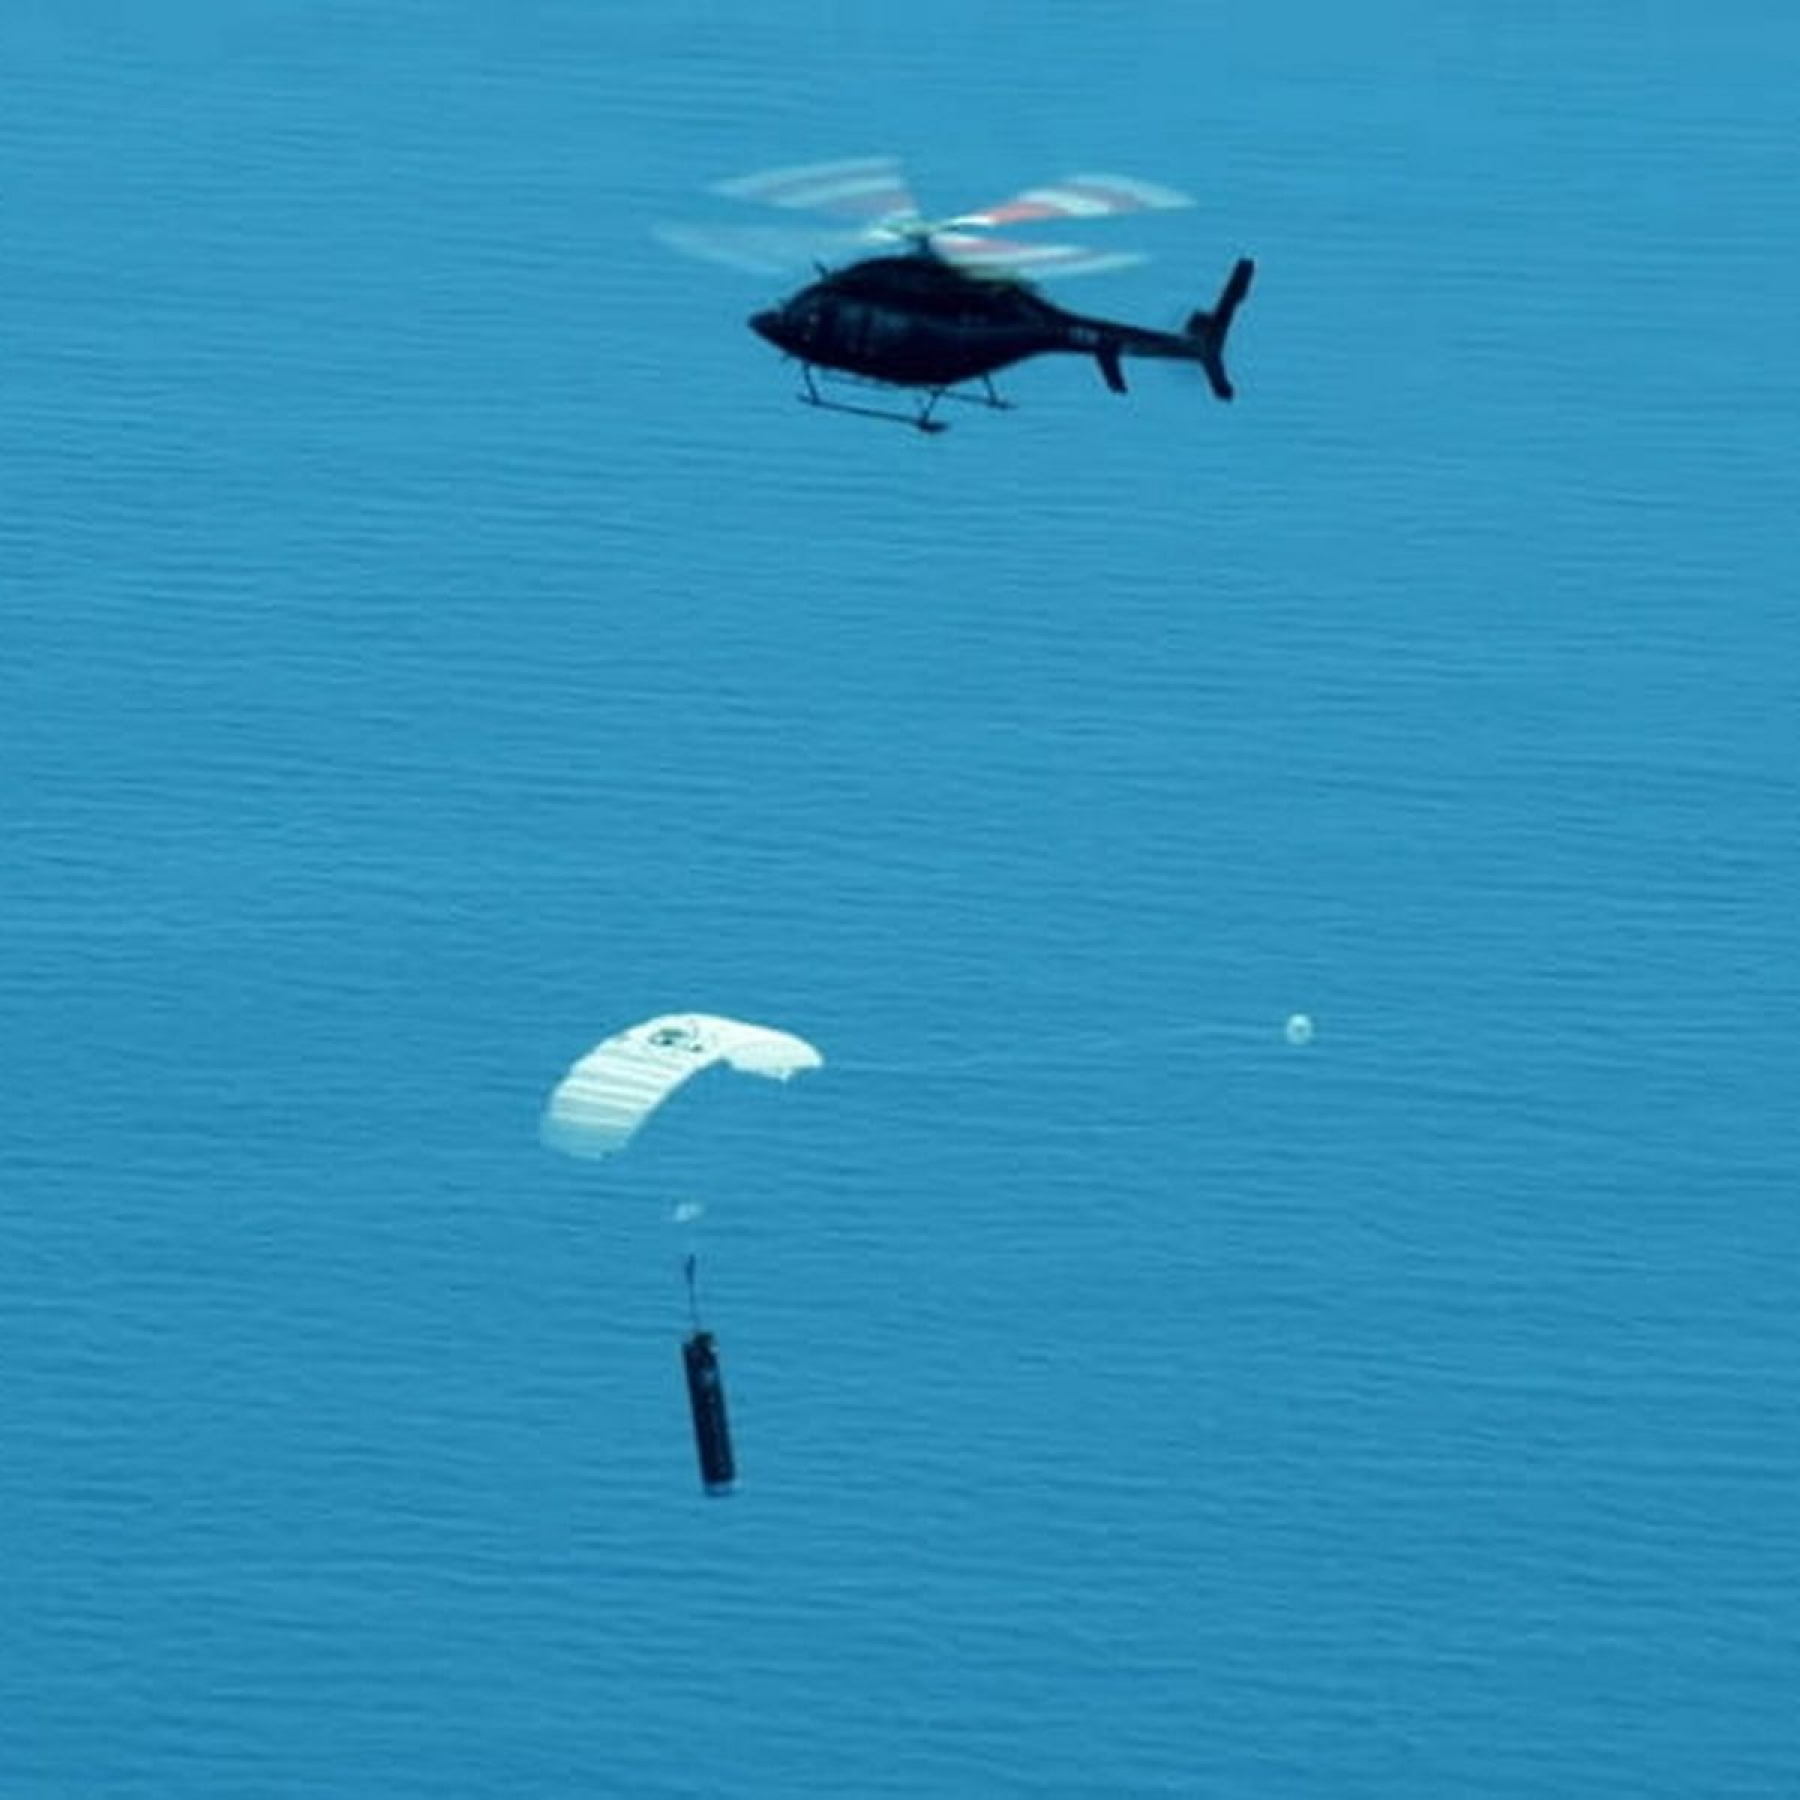 Helicopter catches returning booster over the Pacific